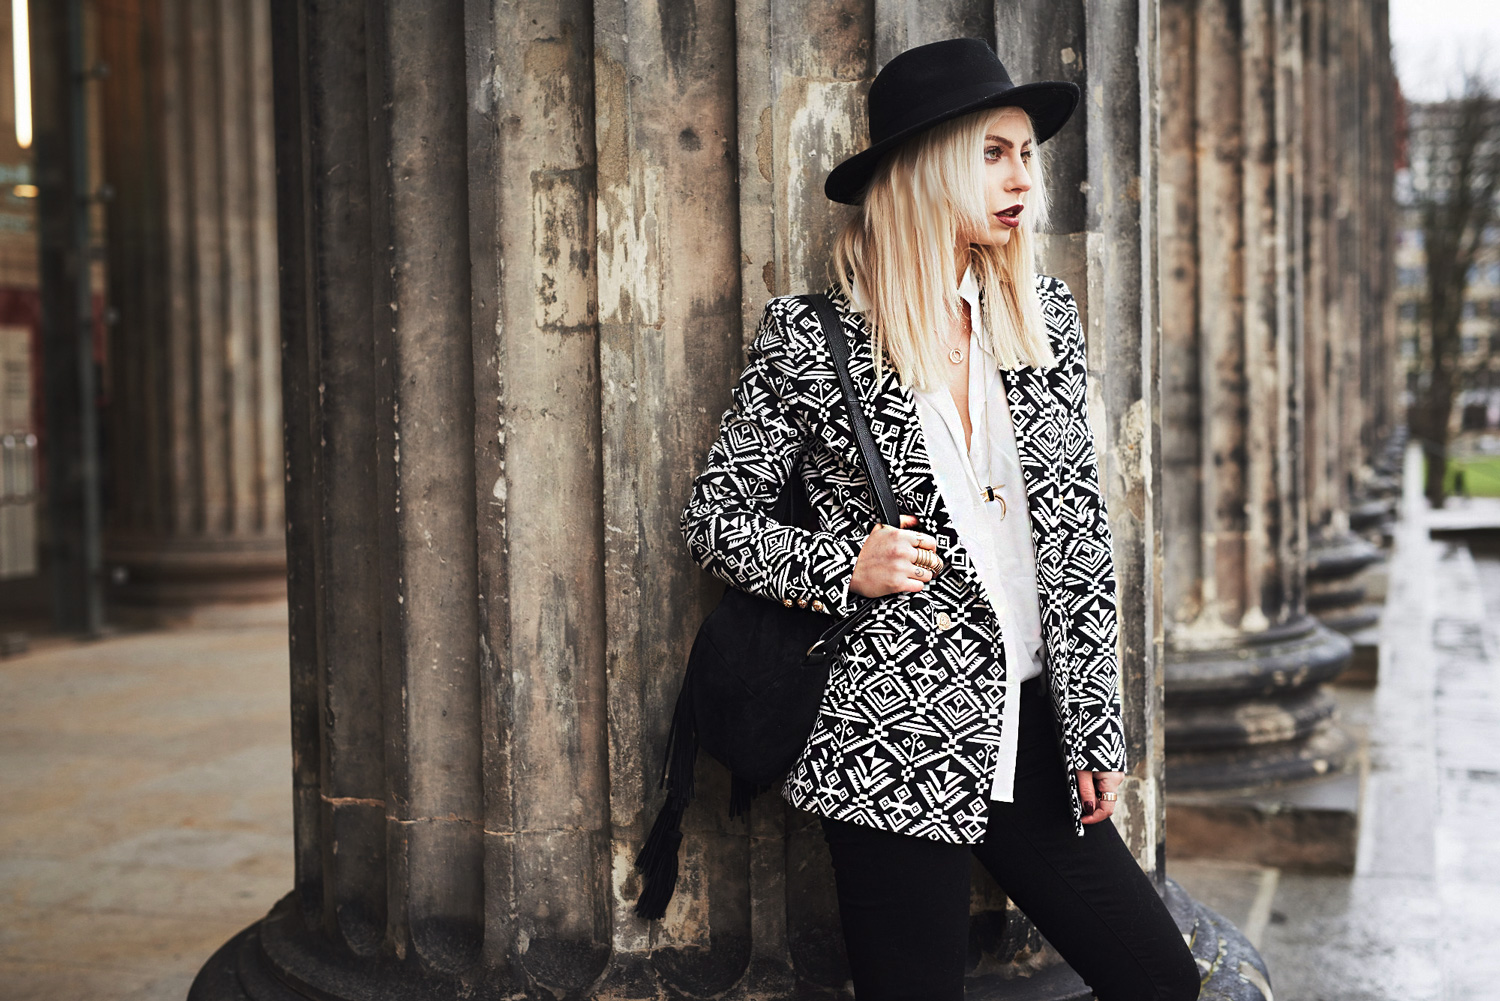 view more pictures on my blog | Winter boho outfit | Edited blazer with aztec pattern | black flared jeans | 70s trend